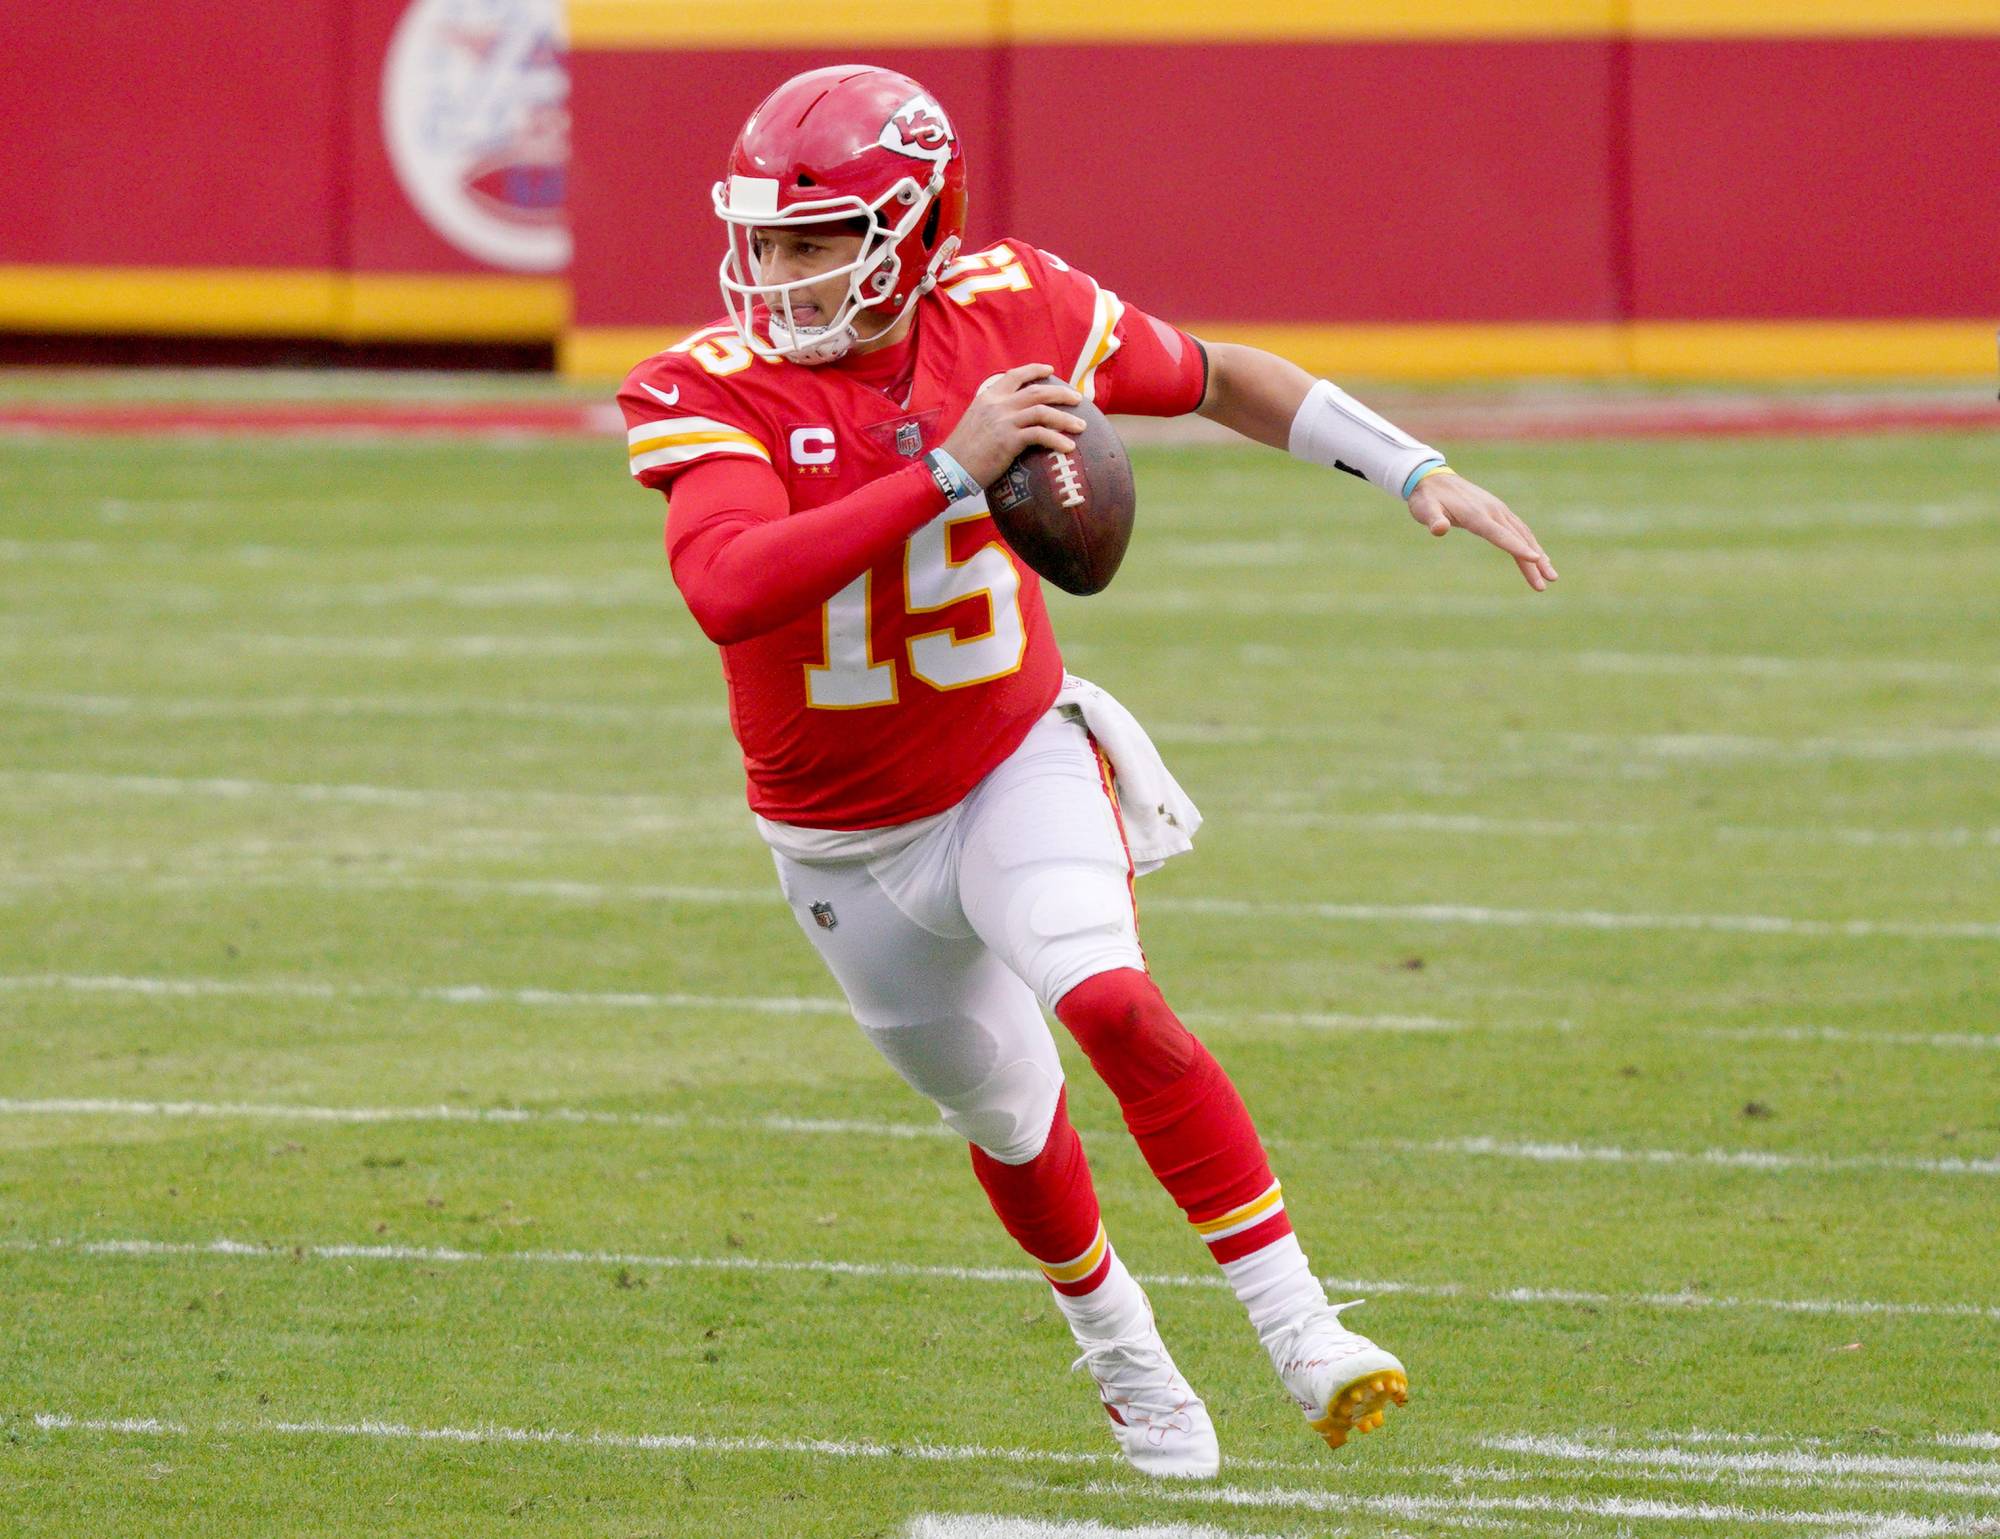 Chiefs QB Patrick Mahomes on track to play in AFC title game - The